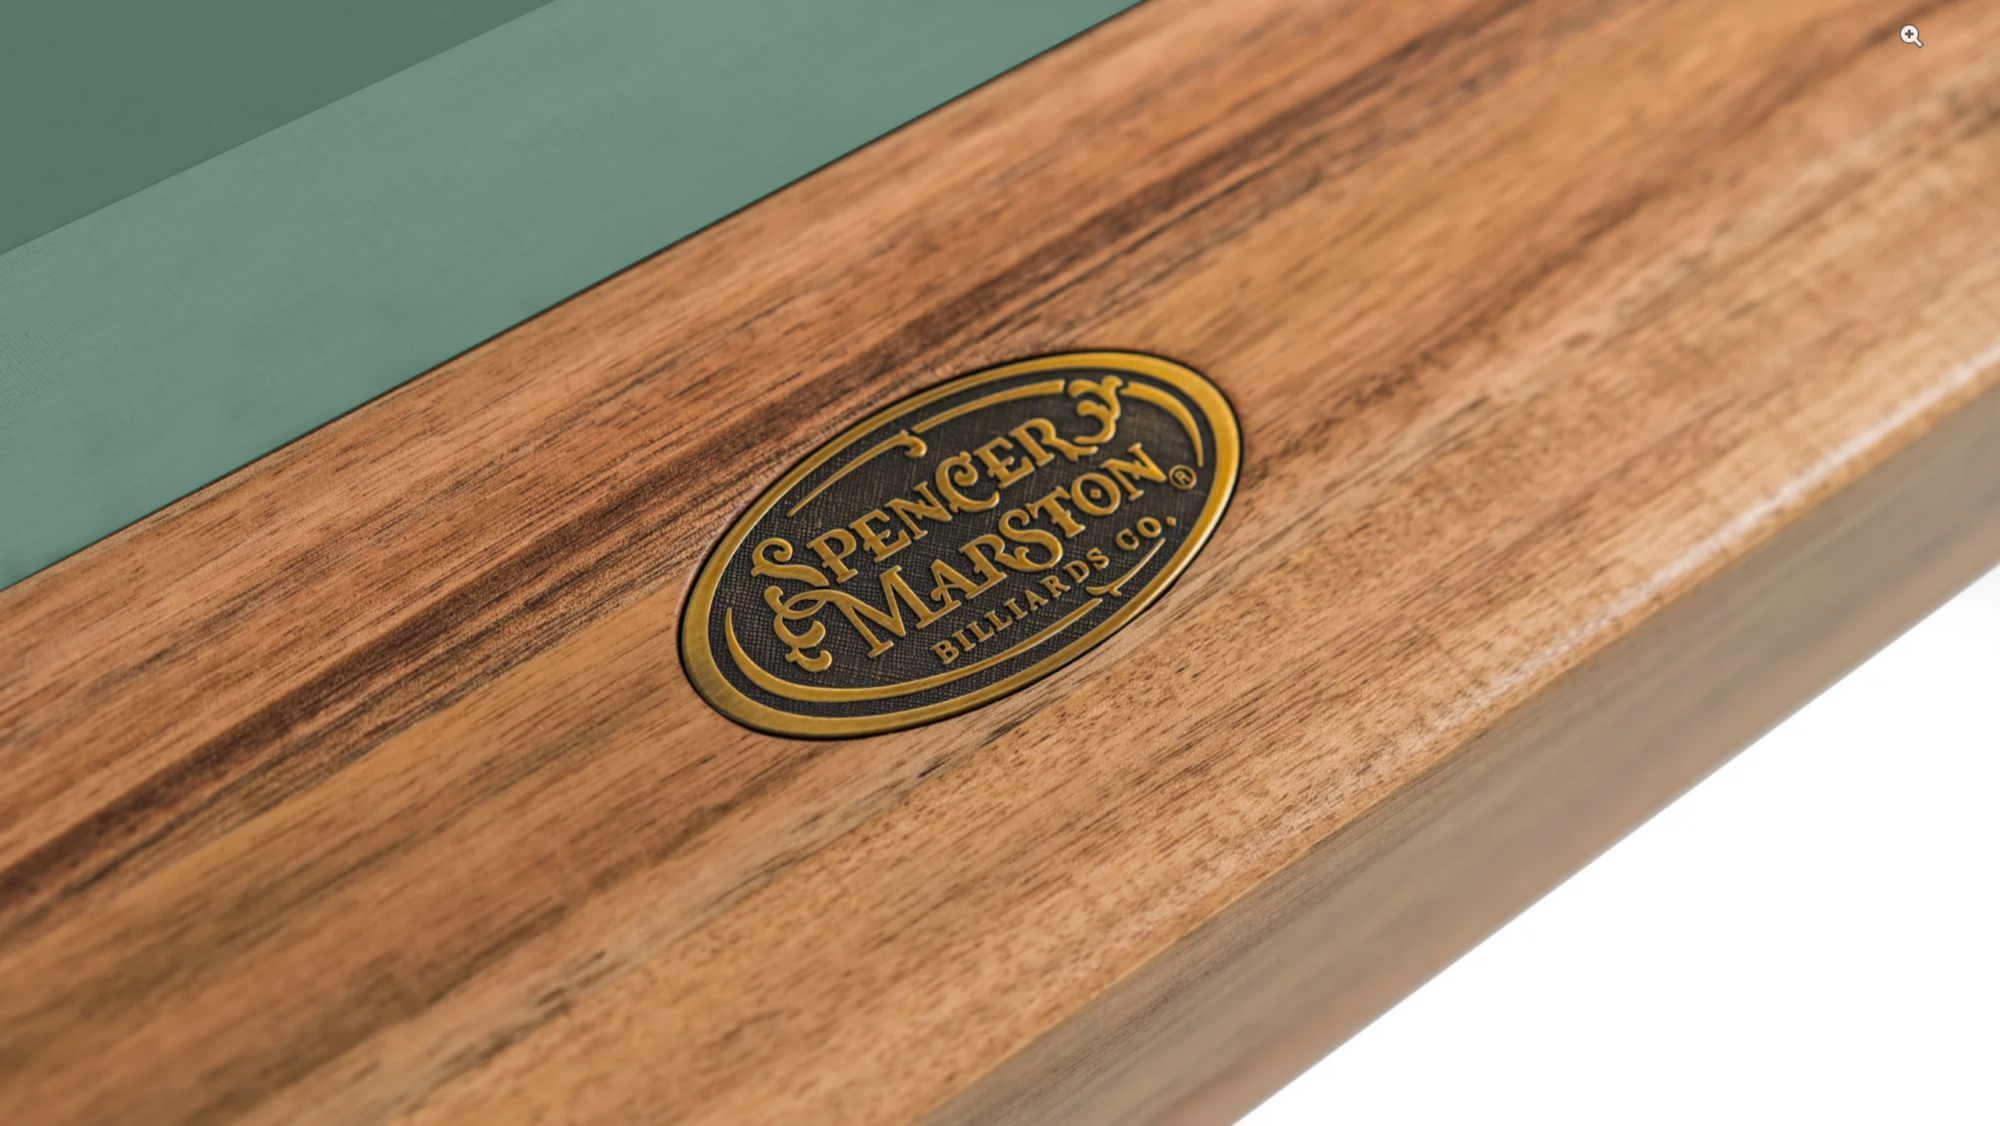 Spencer Marston Billiard Co. launched two new pool tables that are fully FSC® certified, marking a milestone in the billiards industry.